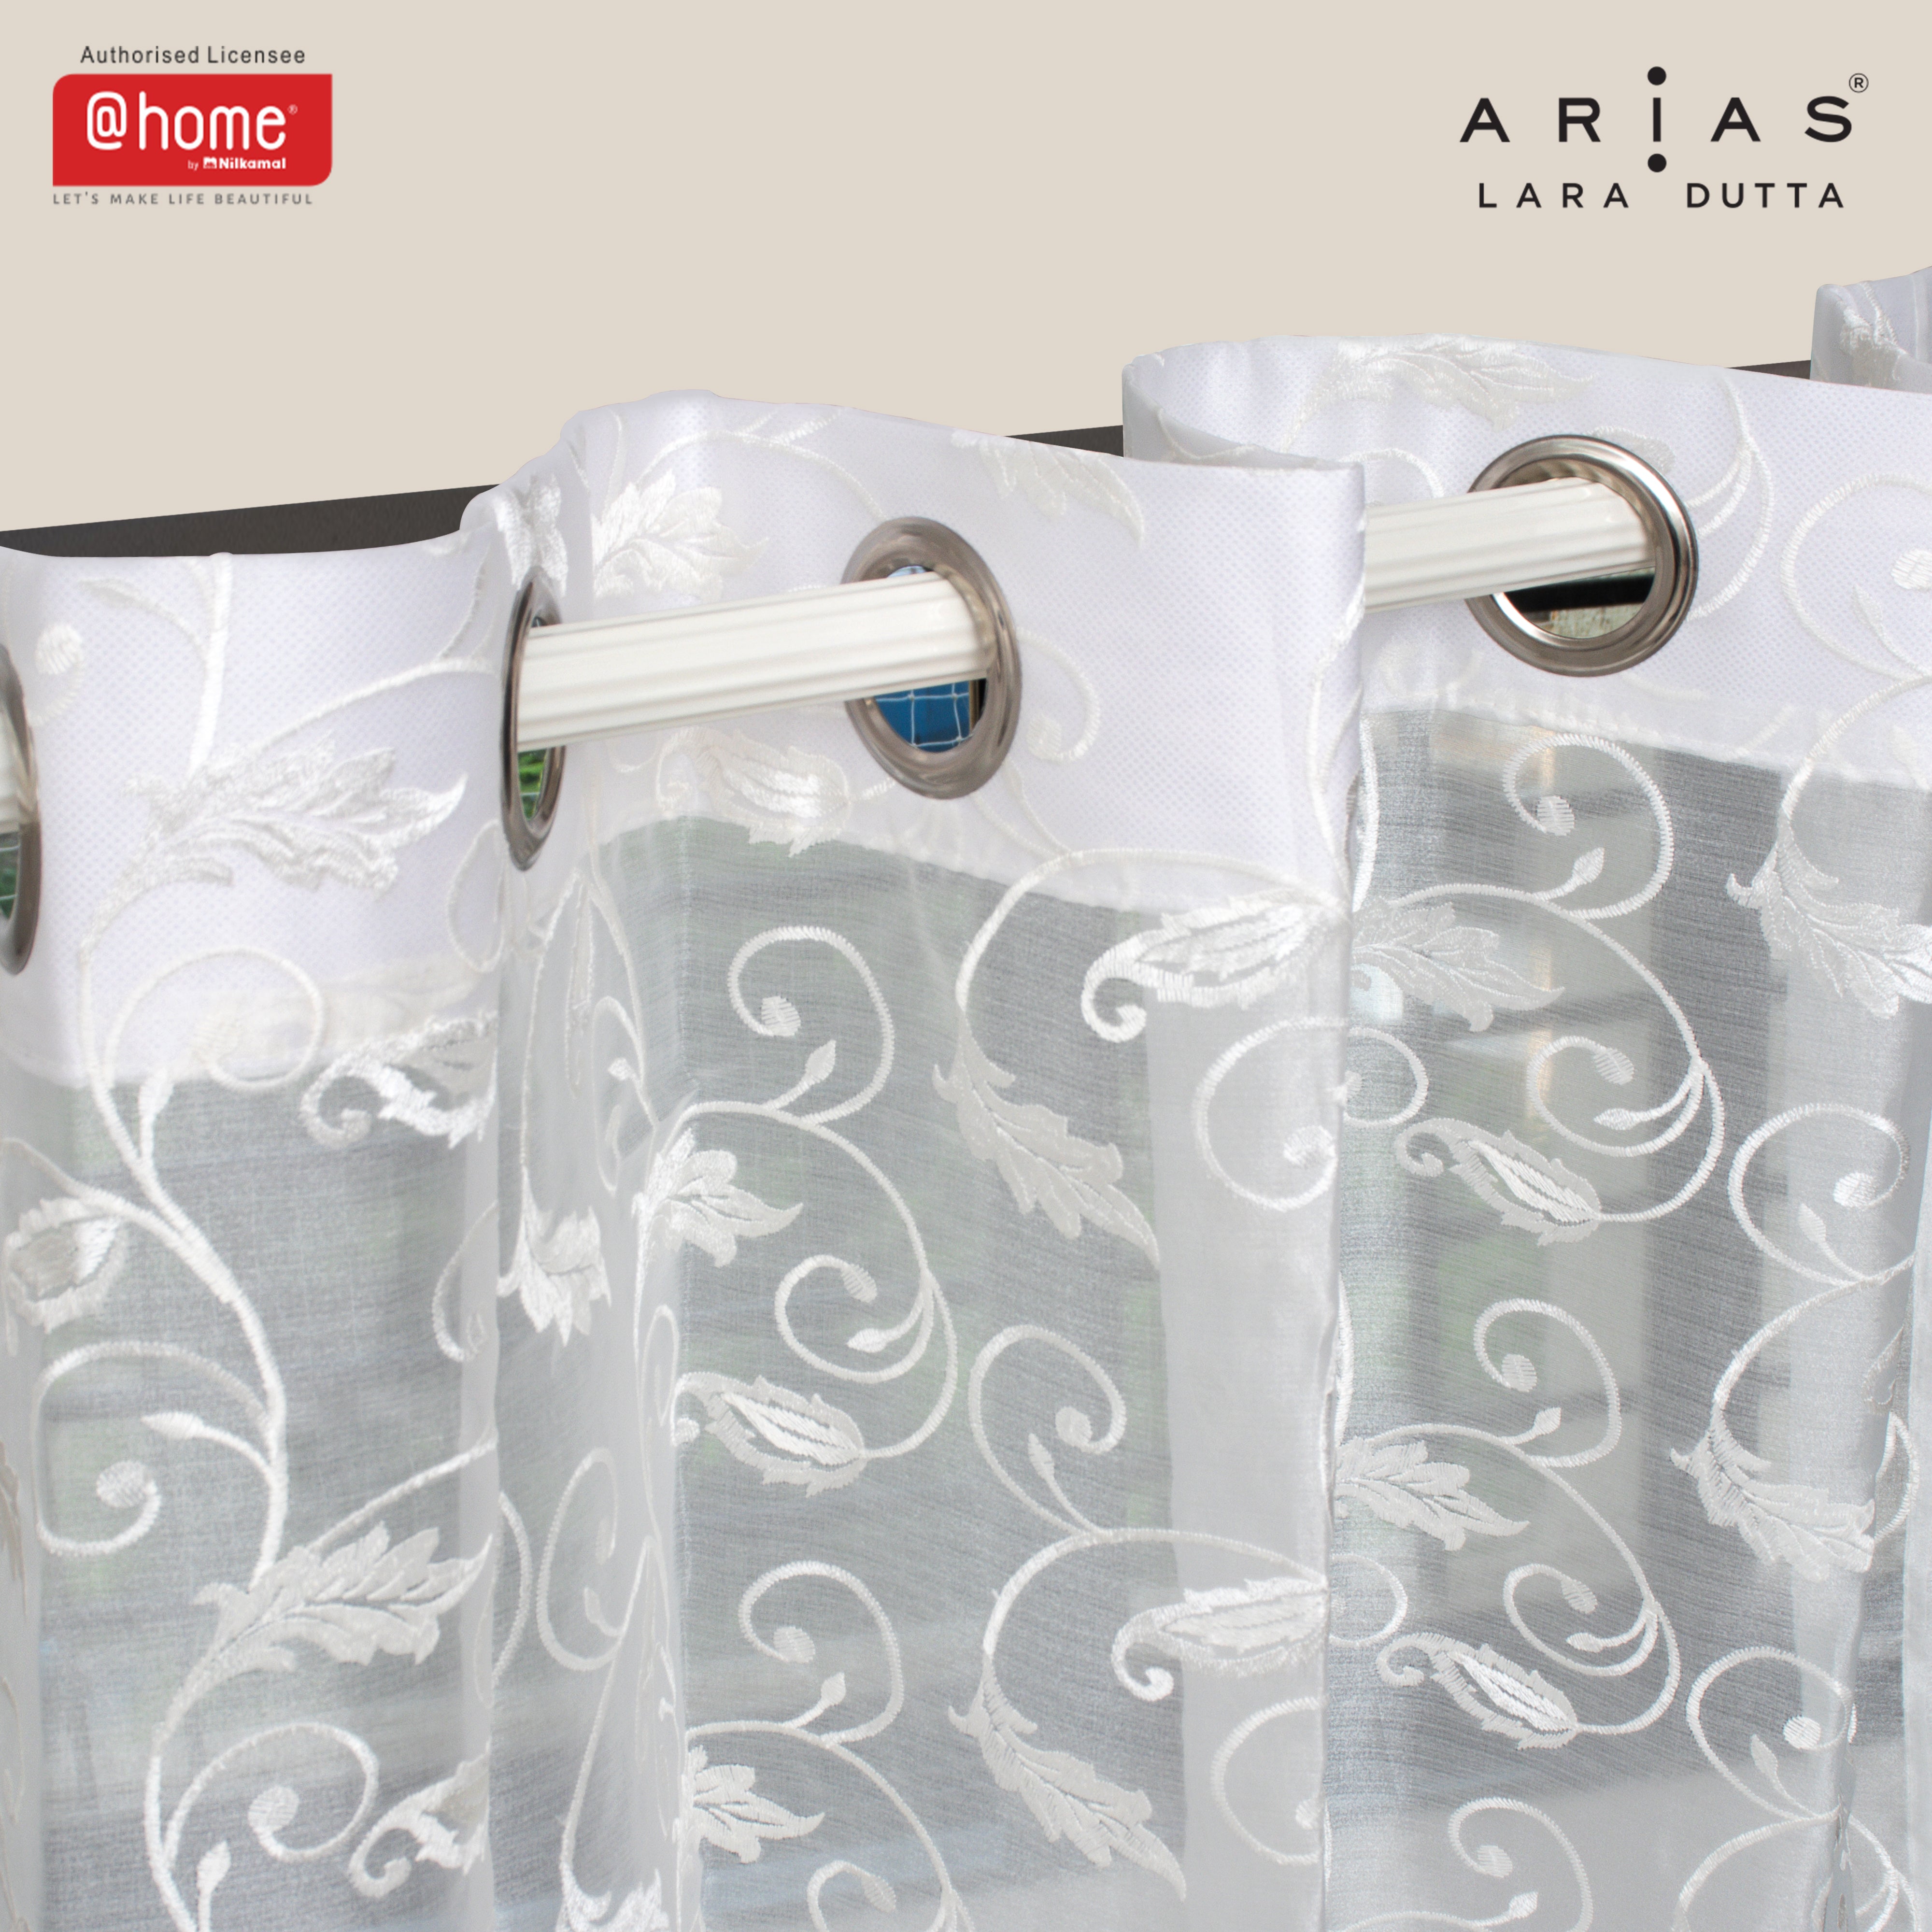 Arias Luxuria Sheers Floral 7 Ft Crepe Organza Door Curtain Set of 2 (White)